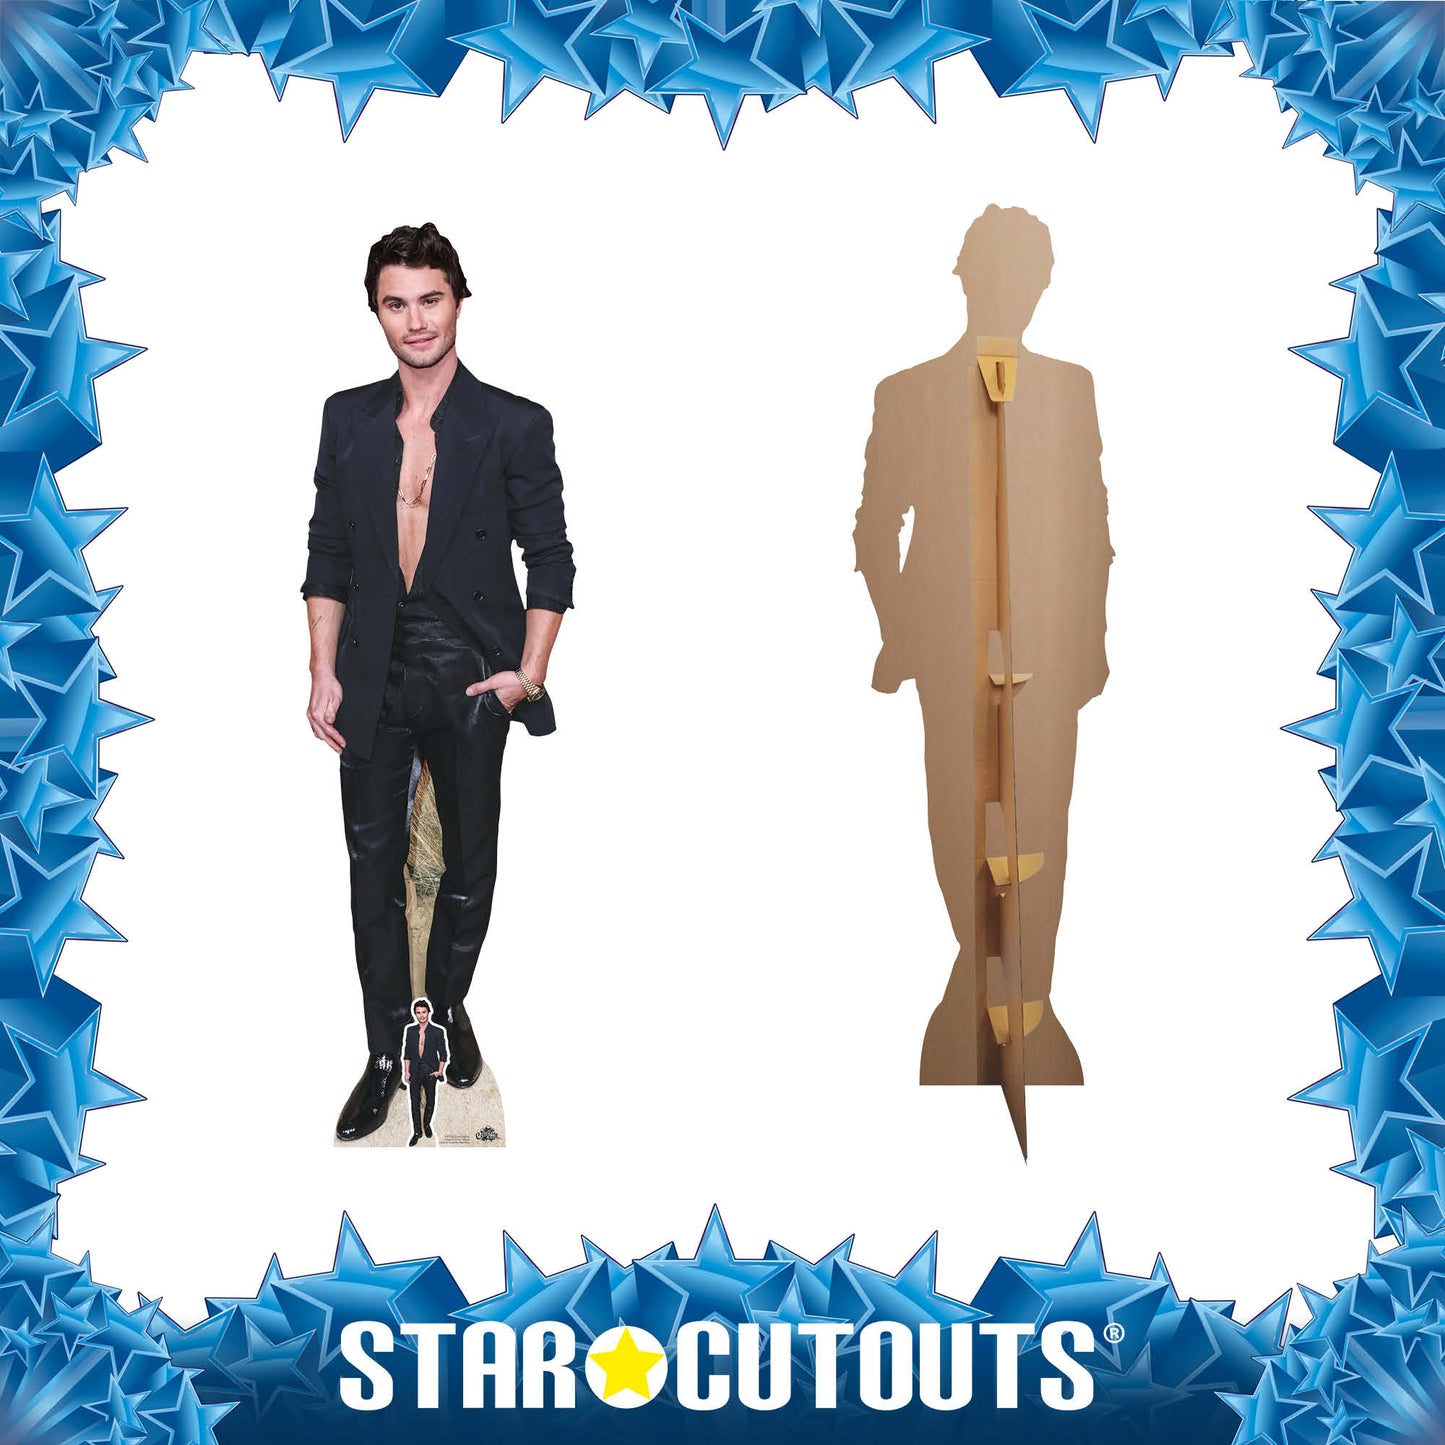 CS1129 Chase Stokes Height 187cm Cardboard Cutout with Mini